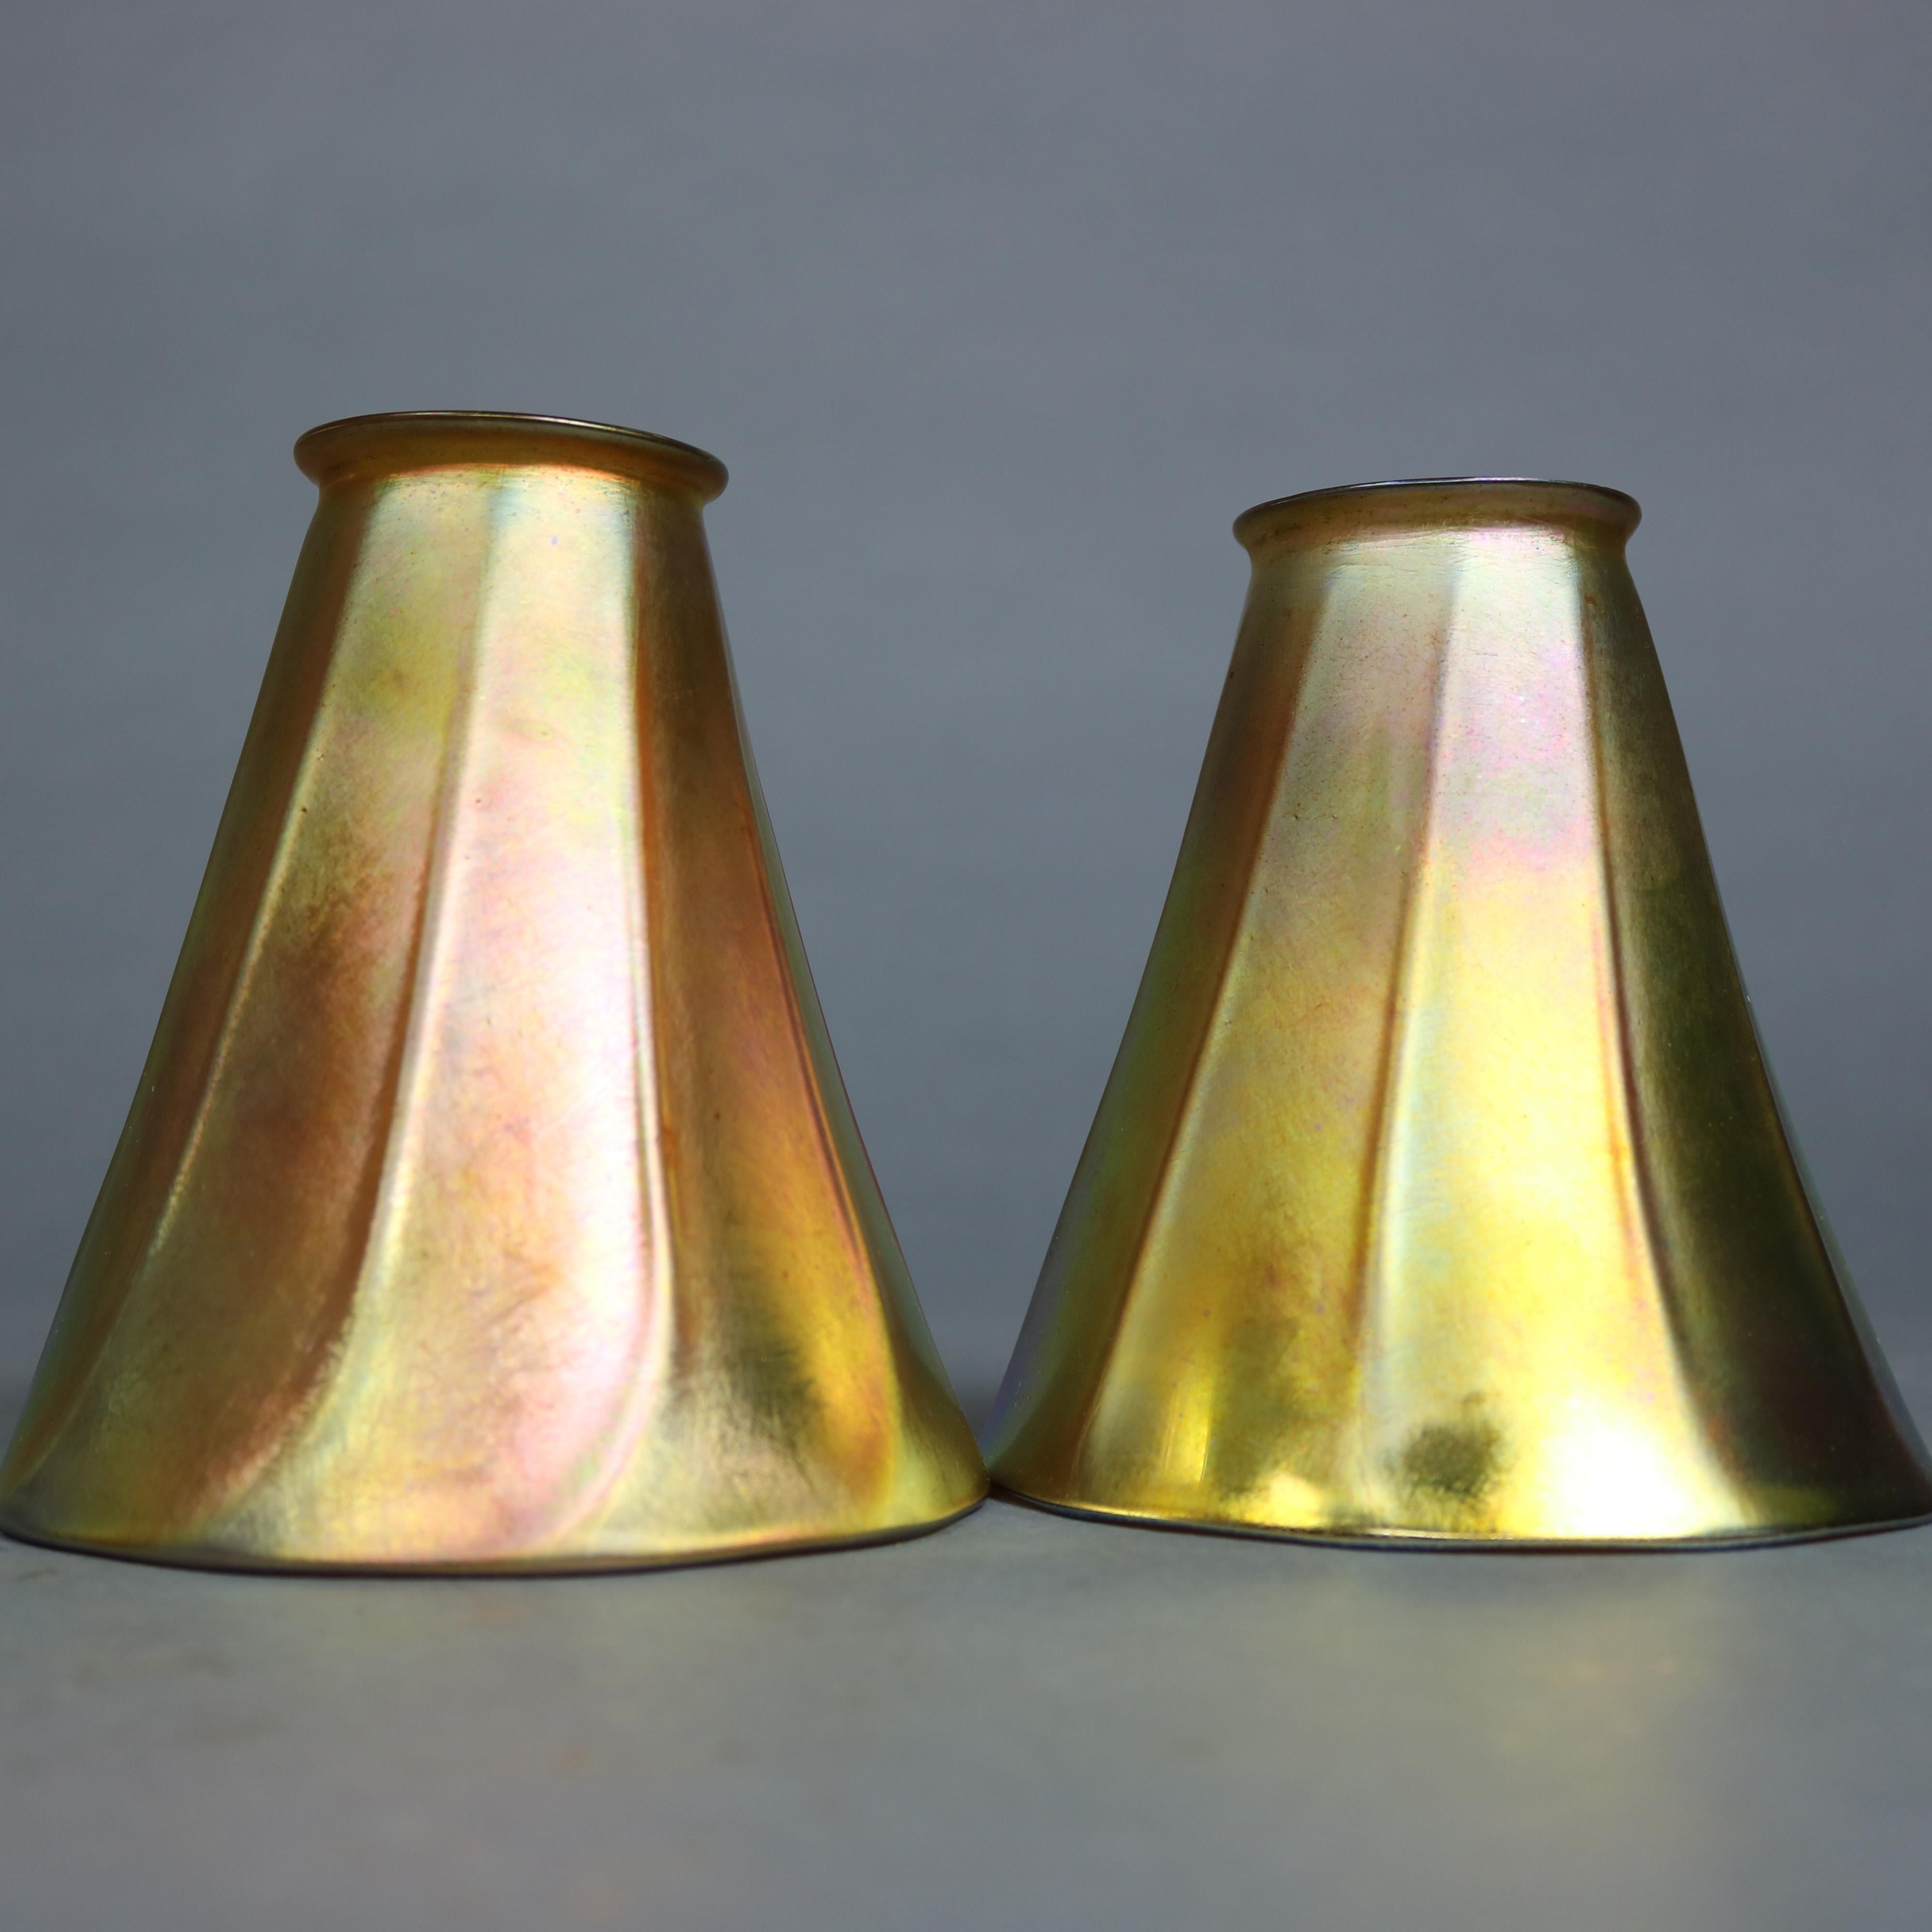 A pair of antique Arts & Crafts art glass shades by Steuben offer faceted and twisted form in gold aurene finish, circa 1920.

Measures: 5.5